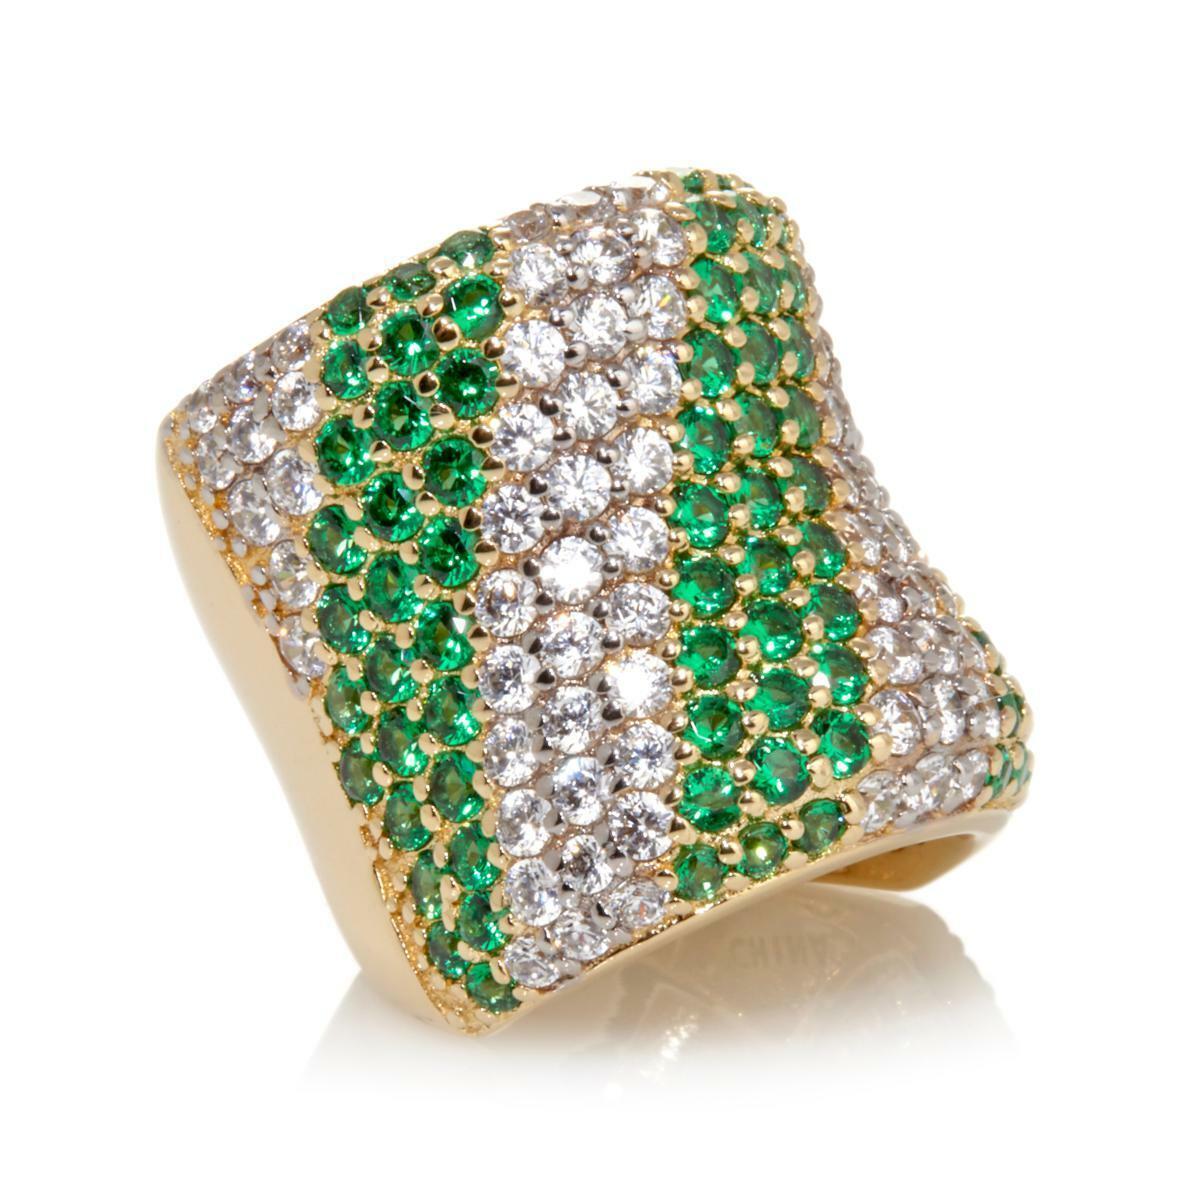 Victoria Wieck Absolute Vermeil Pave Simulated Emerald Ring Size 7 Hsn $199